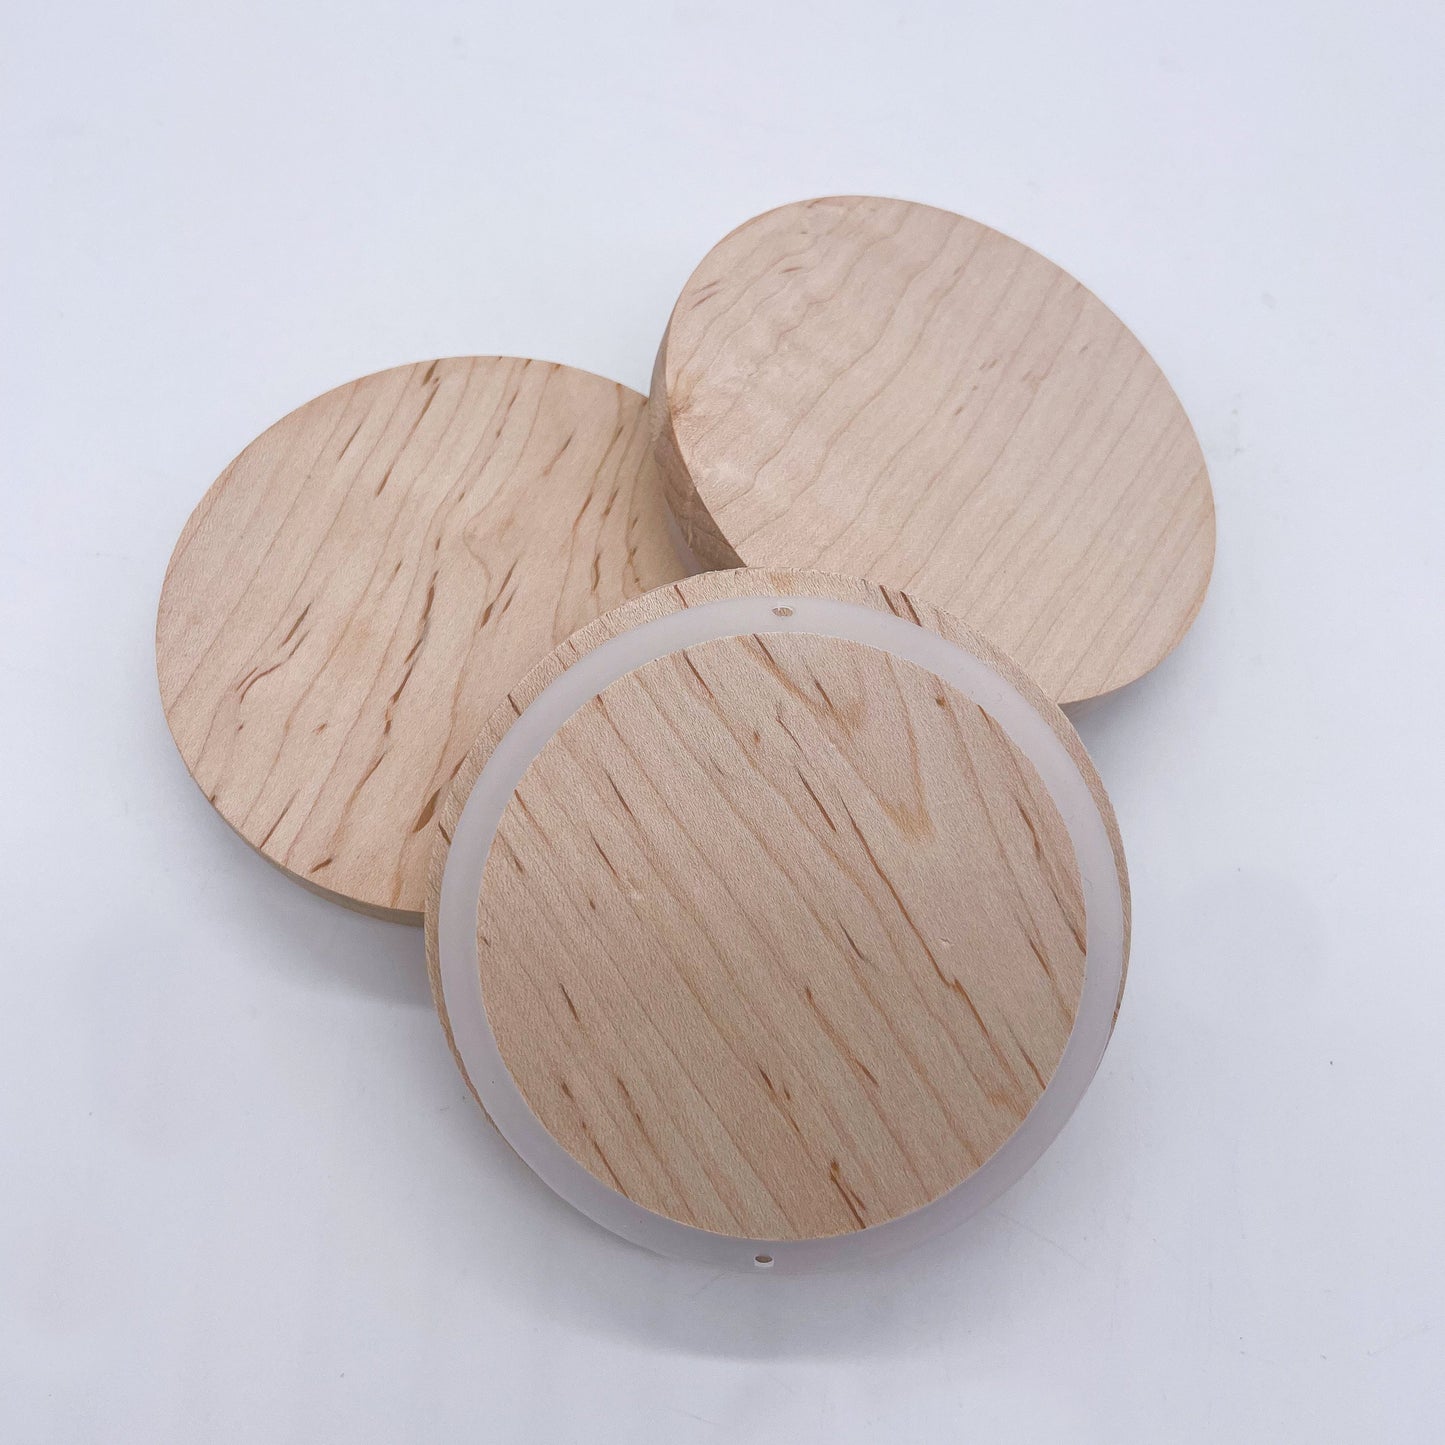 Candle Lids for 12 oz candles